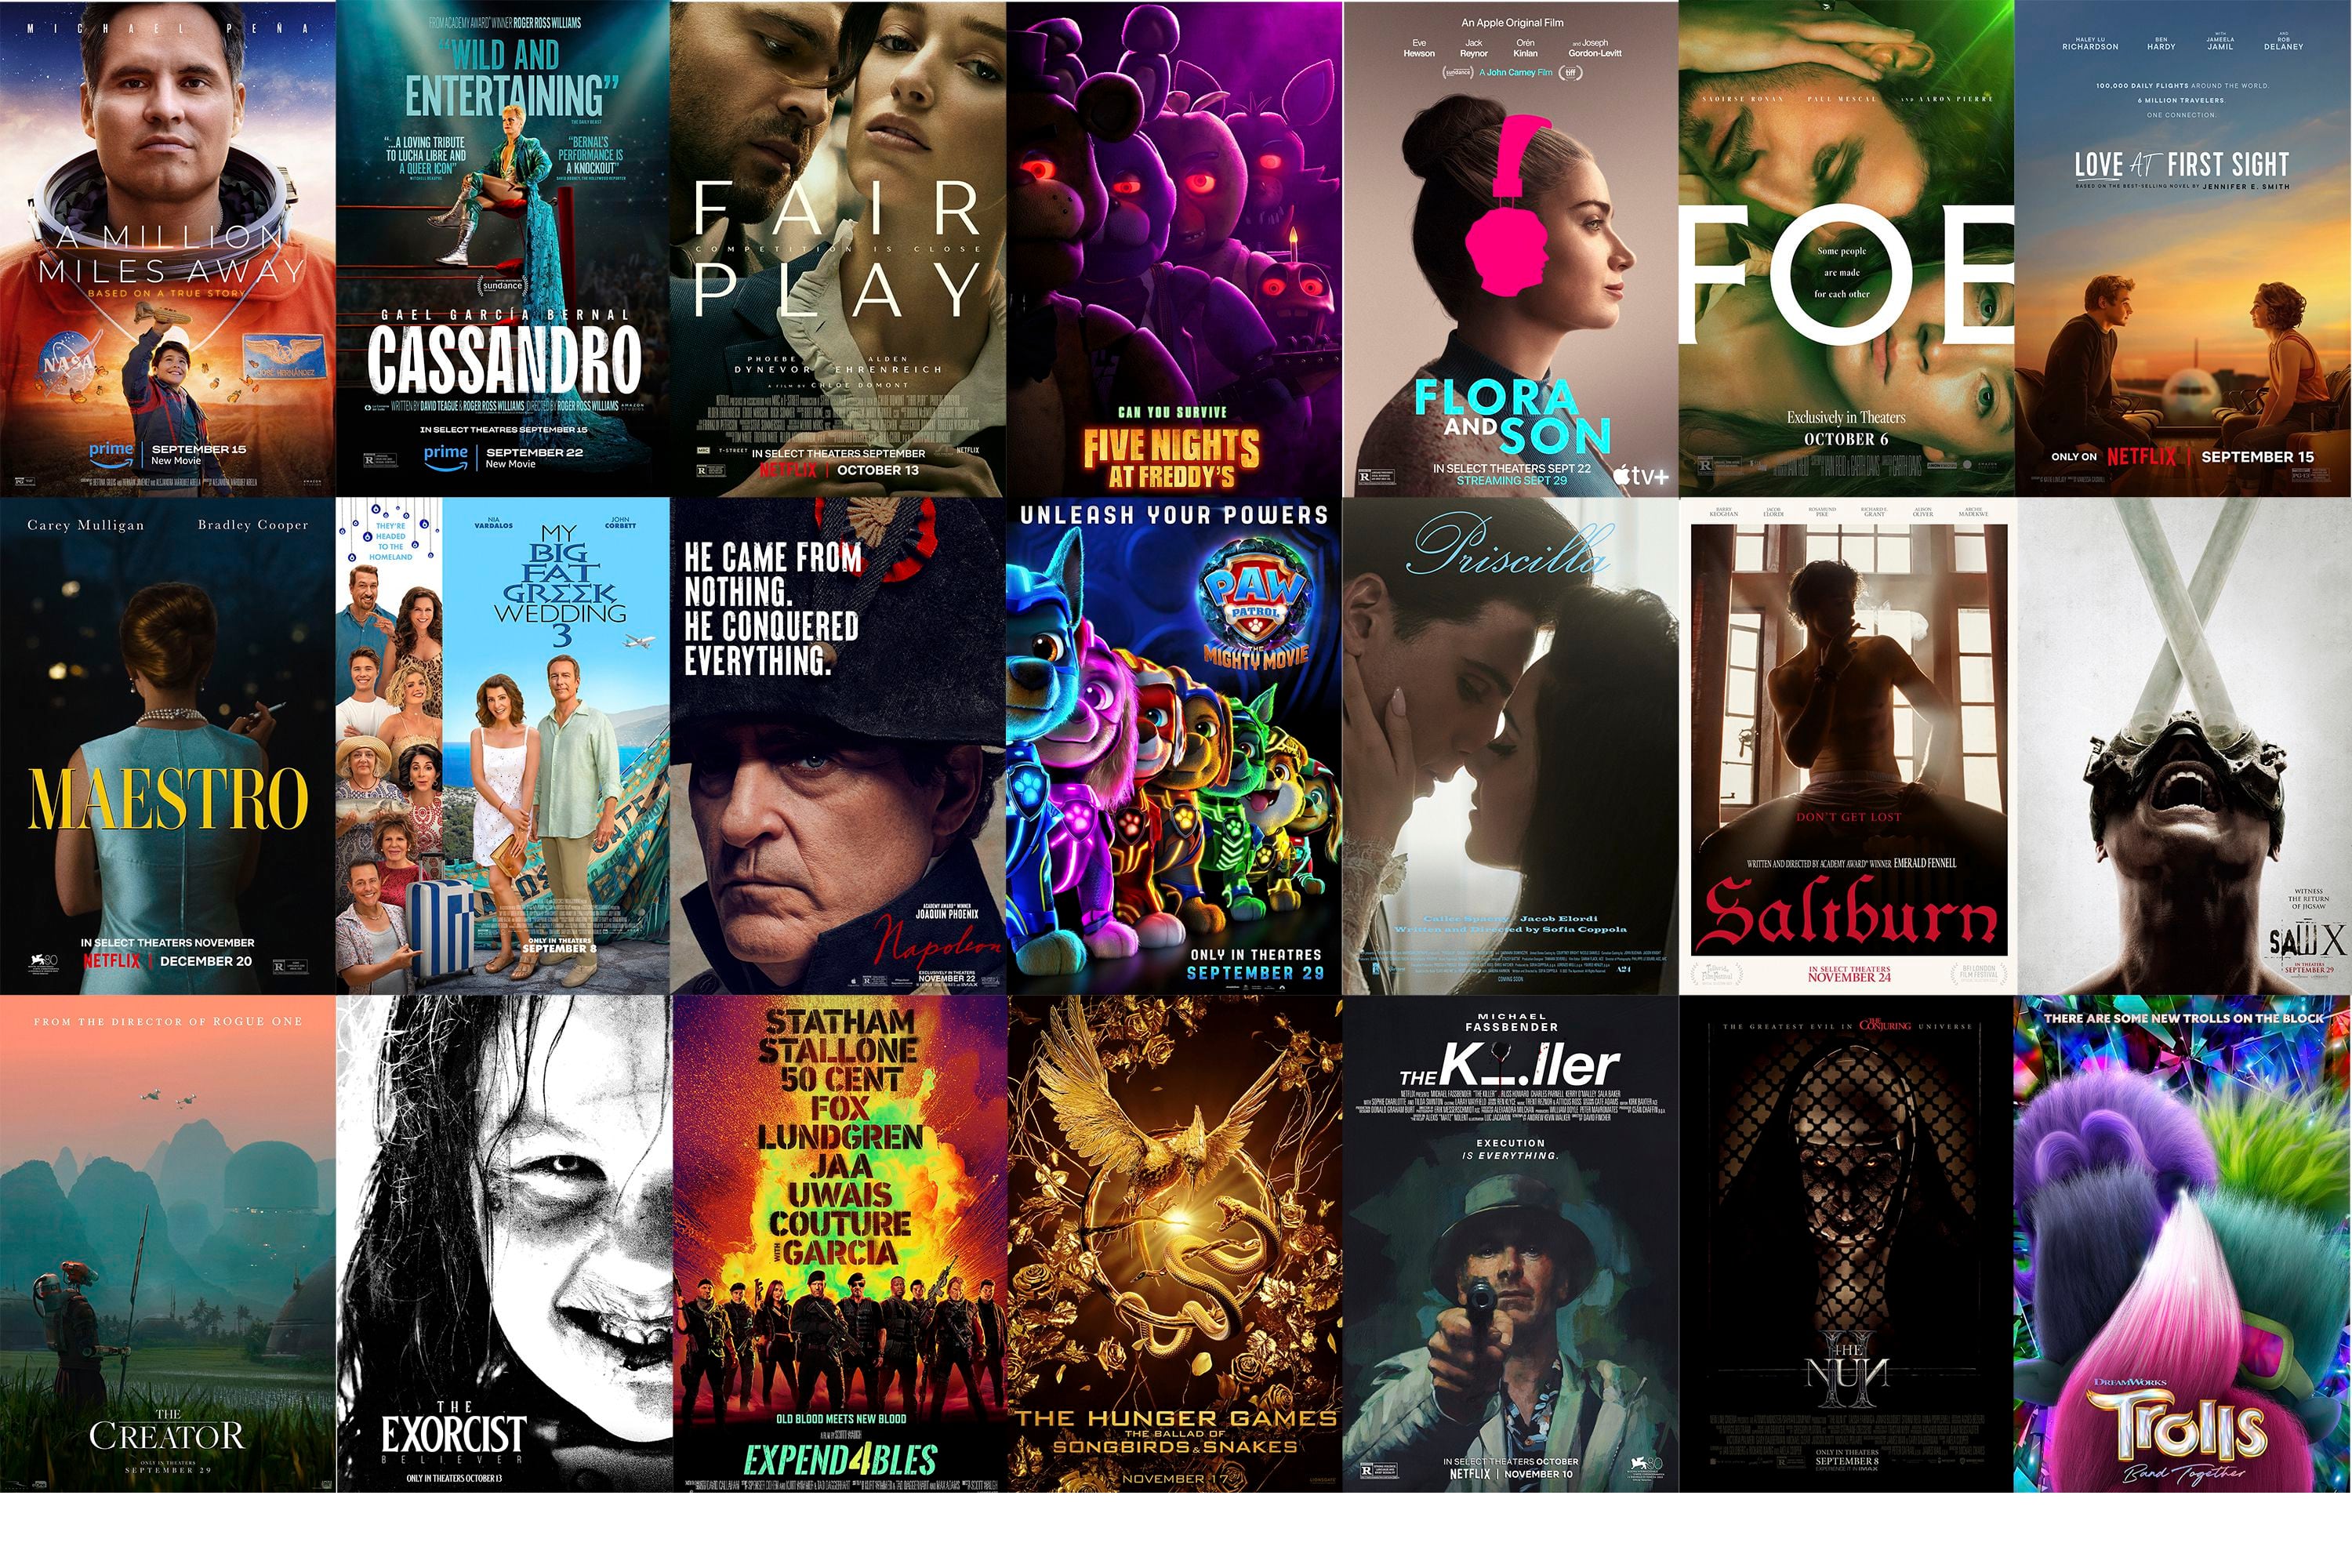 The films coming to theaters and streaming soon, from 'Dumb Money